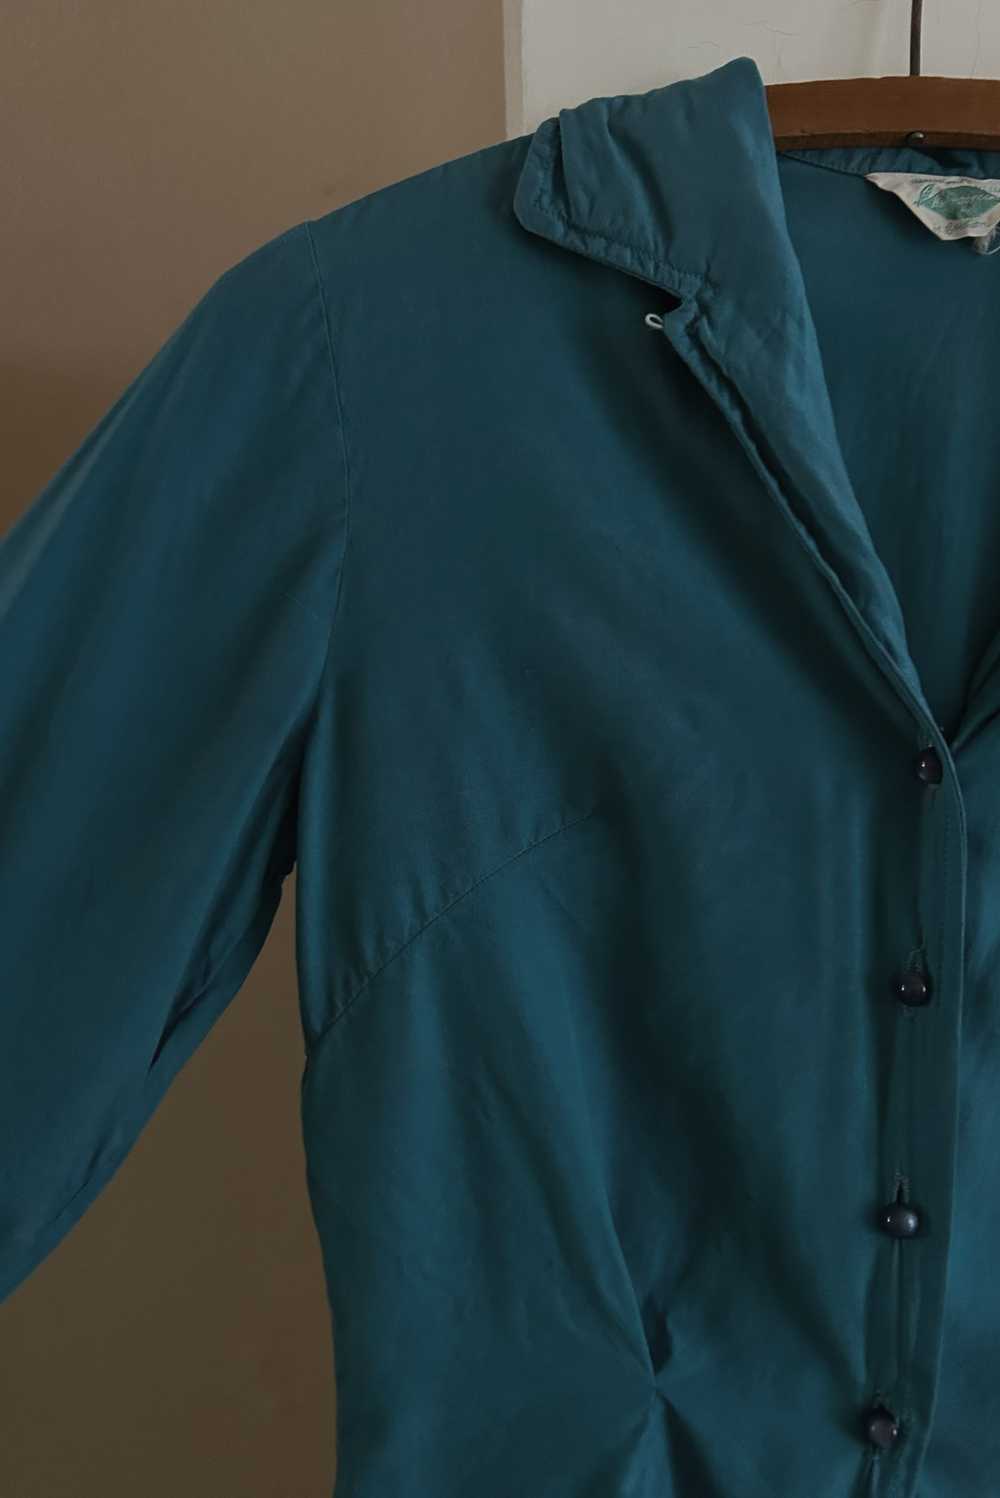 1950's TEAL SILK BUTTON BLOUSE - image 3